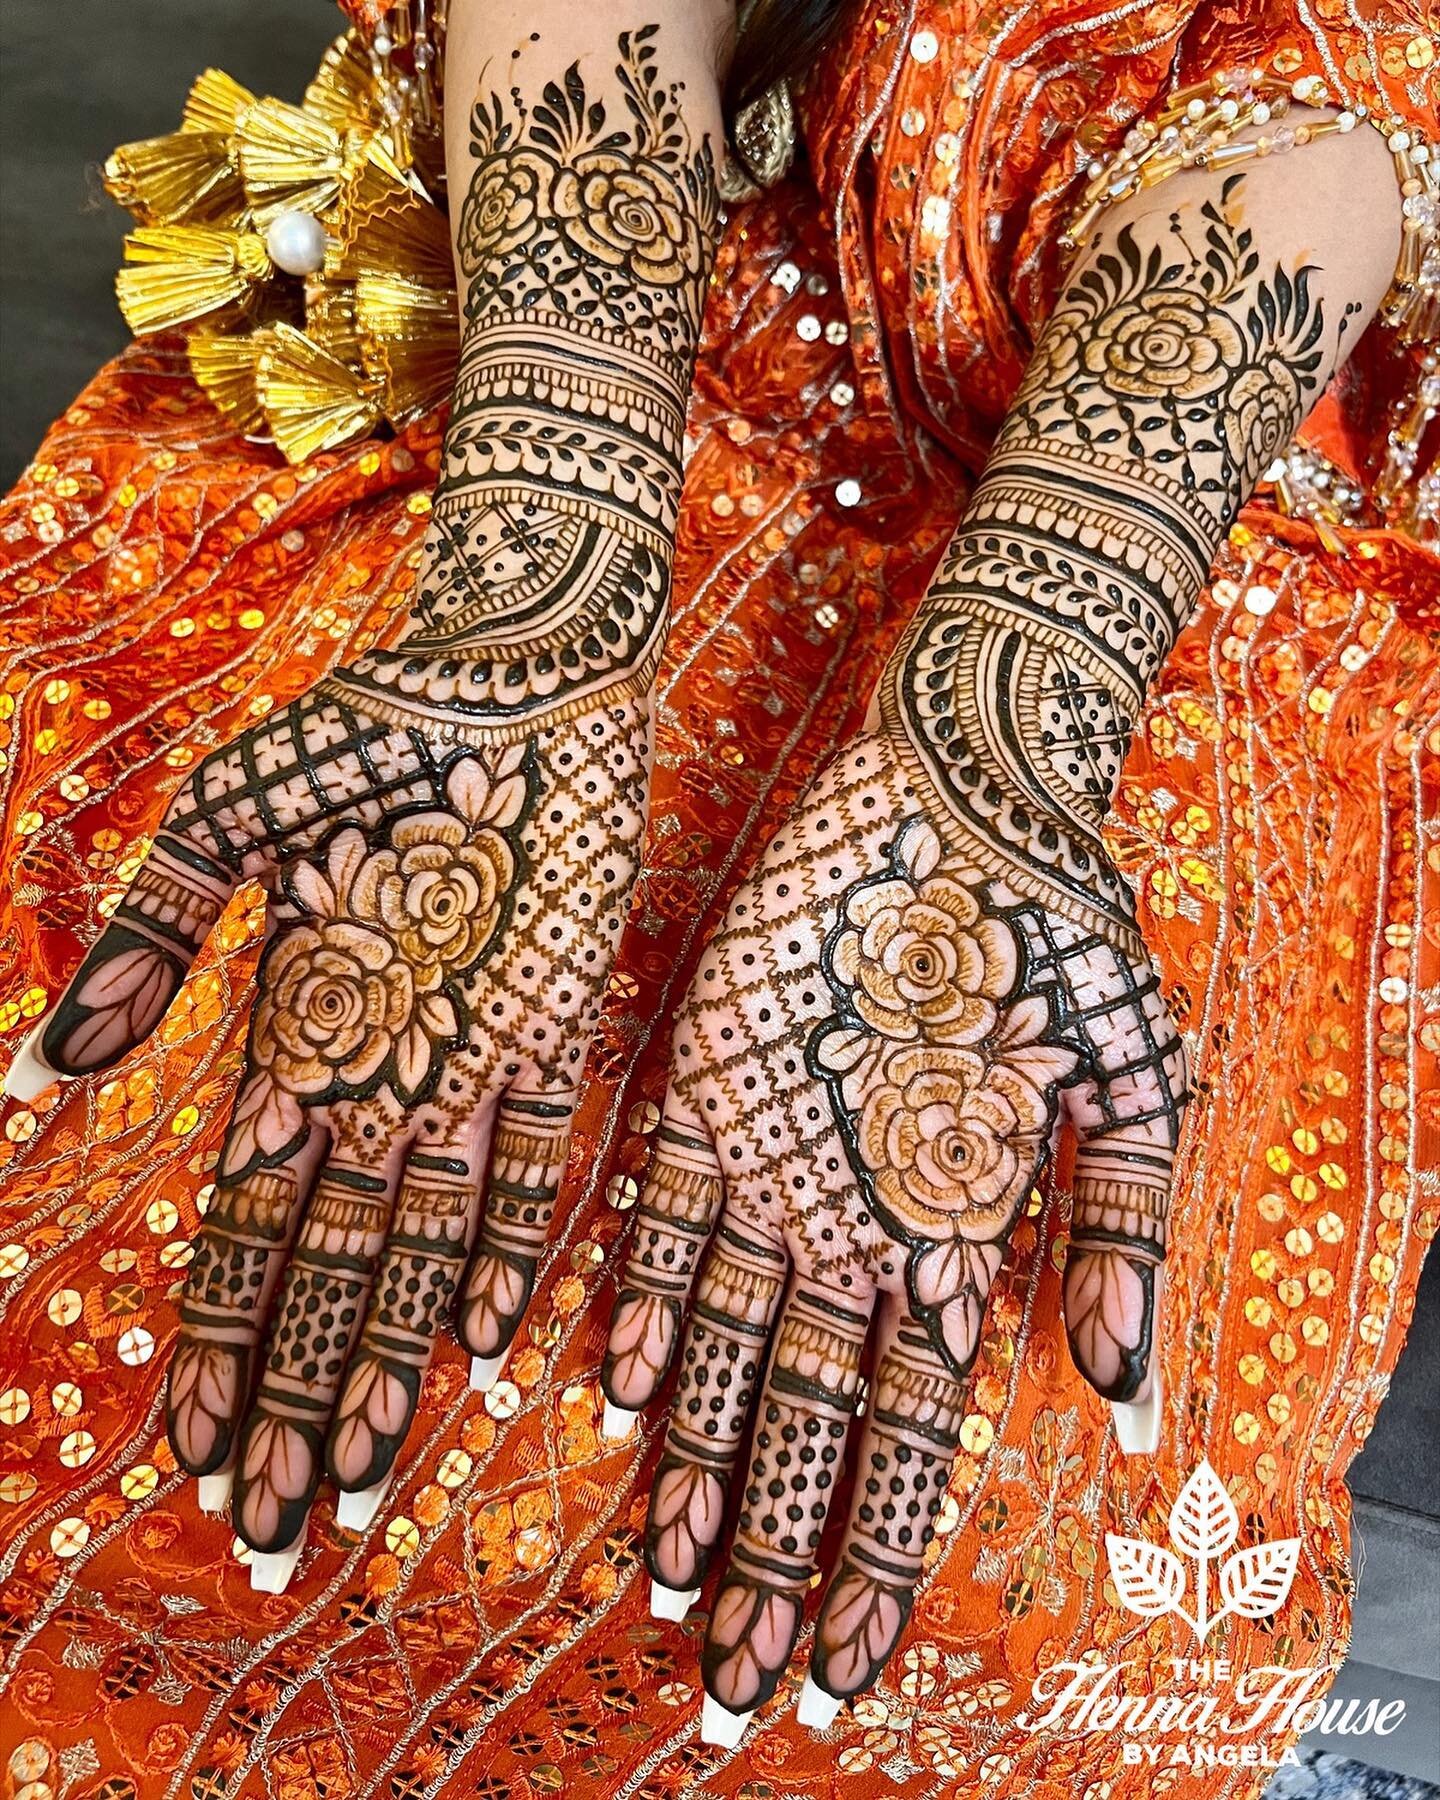 A I S H A 🧡💛

2023 bridal bookings are filling up fast! I am currently sitting at 50% booked. It is going to be an incredible year 😍✨ 
Please email info@thehennahouse.ca for all booking inquiries 💌